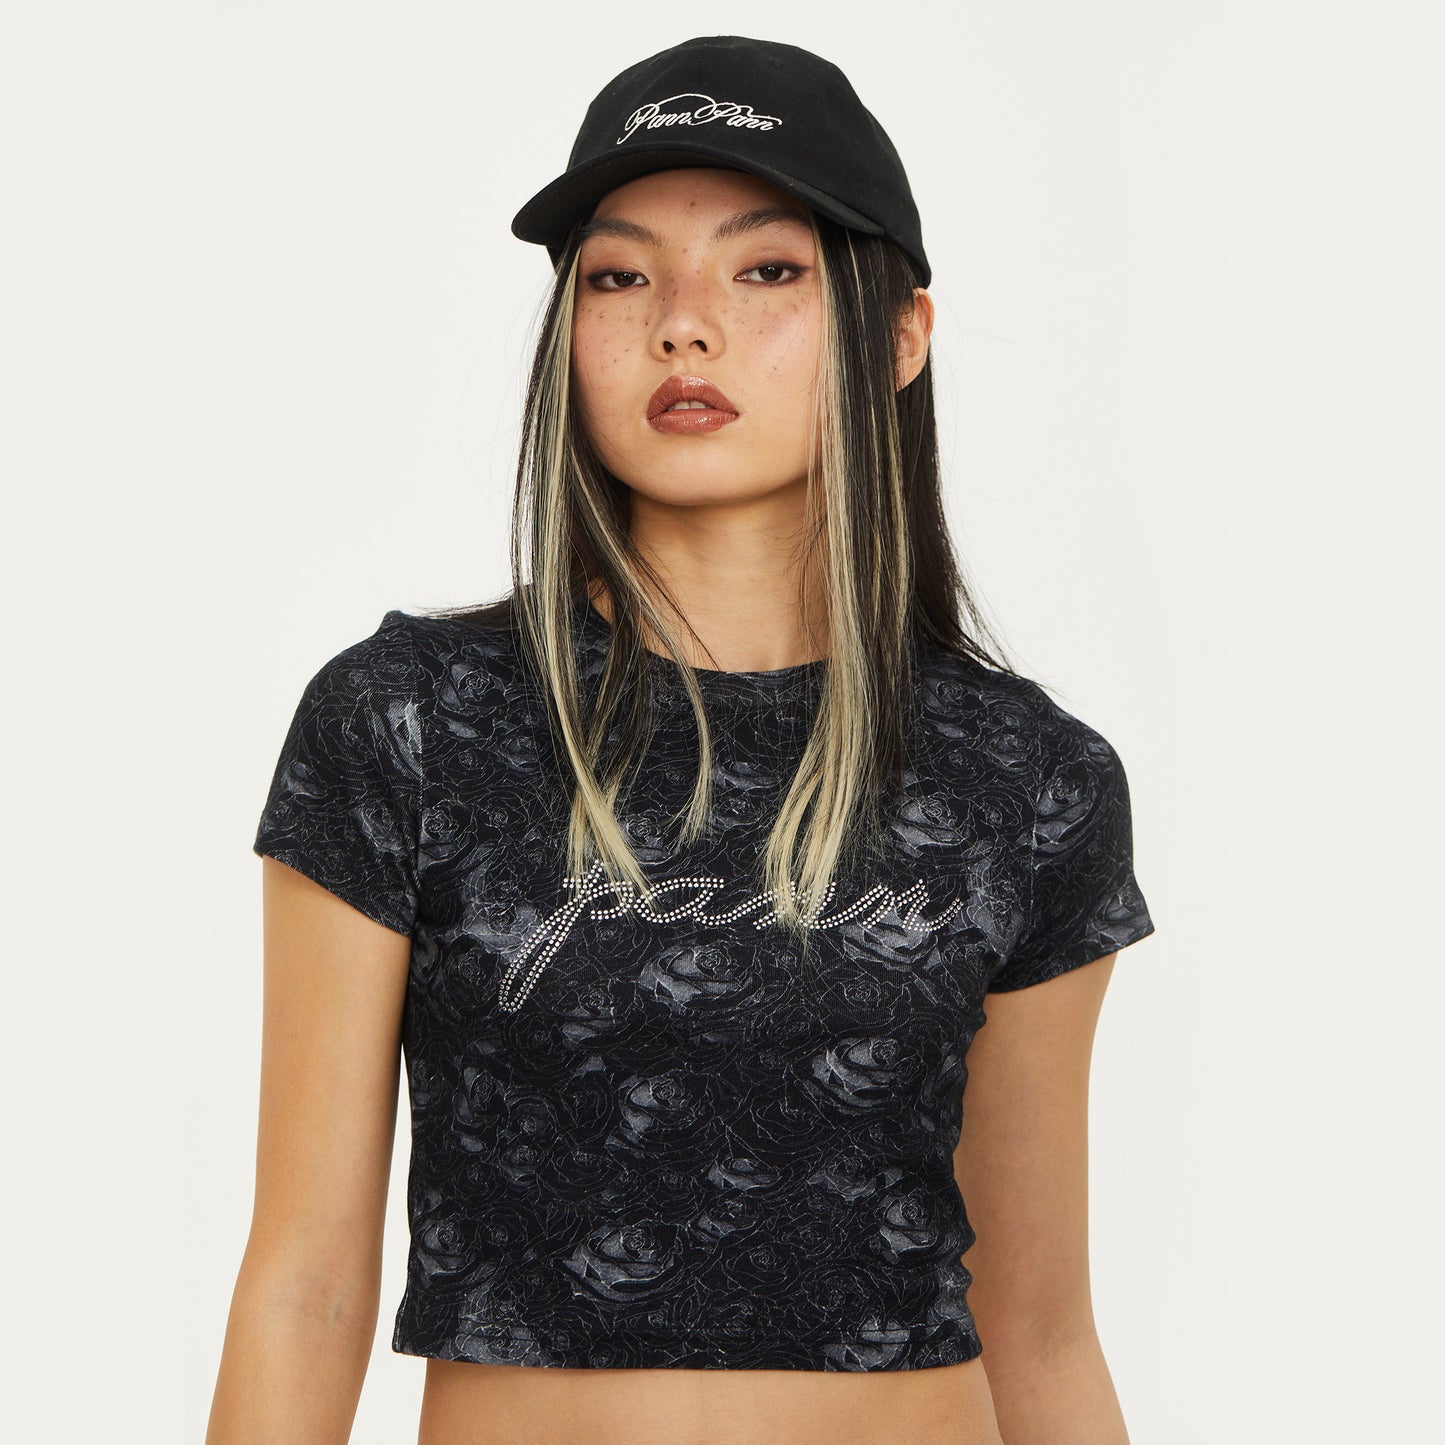 Gummy Embroidery Cap in Black